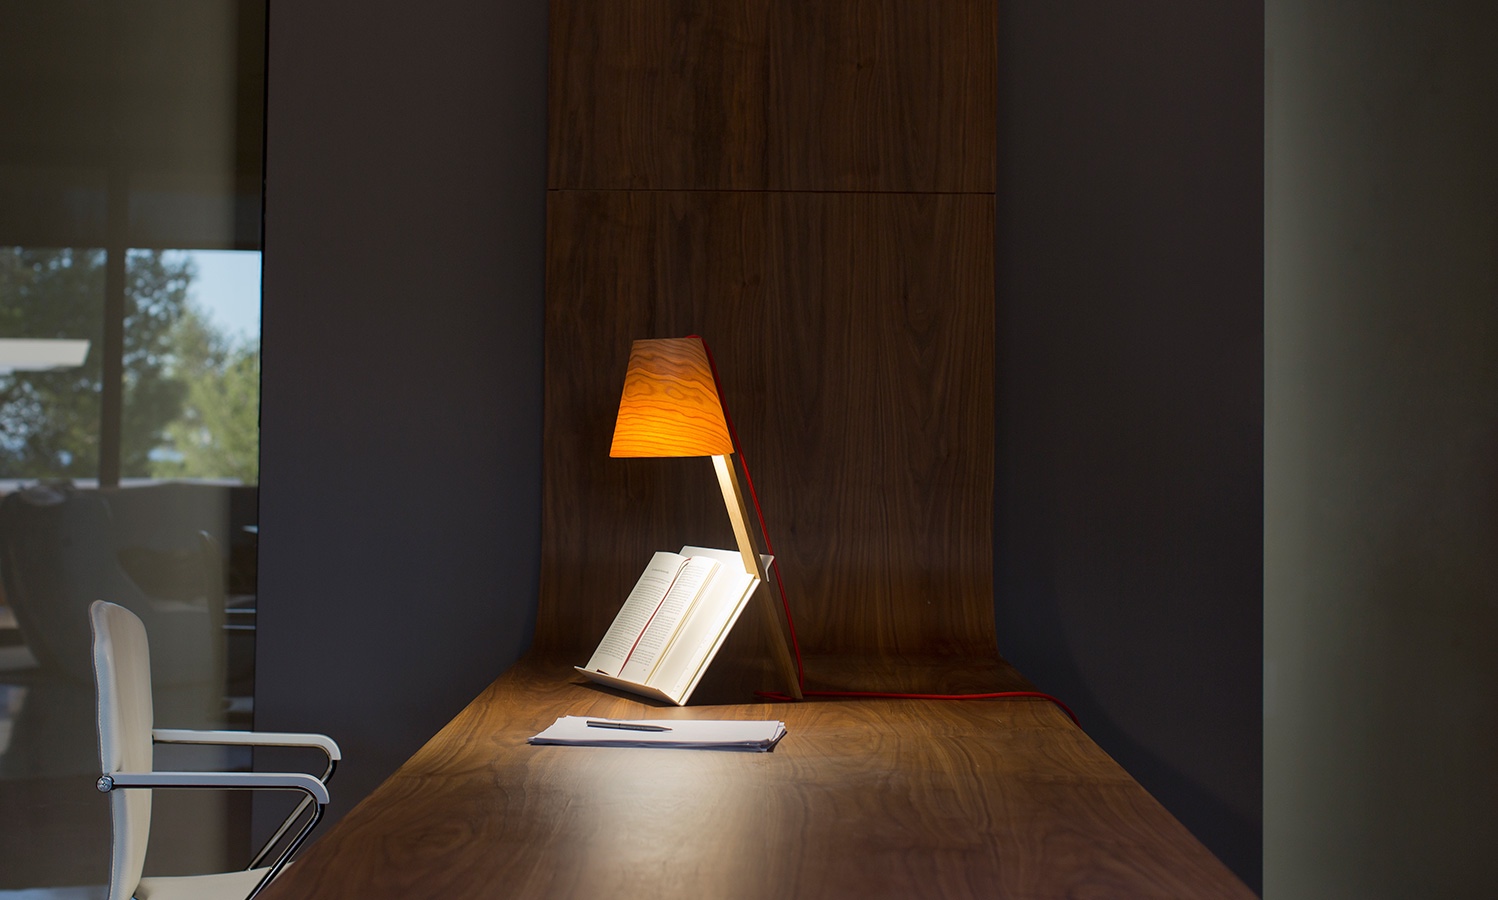 The Asterisco lamp by talented Valencia-based design studio Cuatro Cuatros for LZF Lamps. Image courtesy of LZF Lamps.